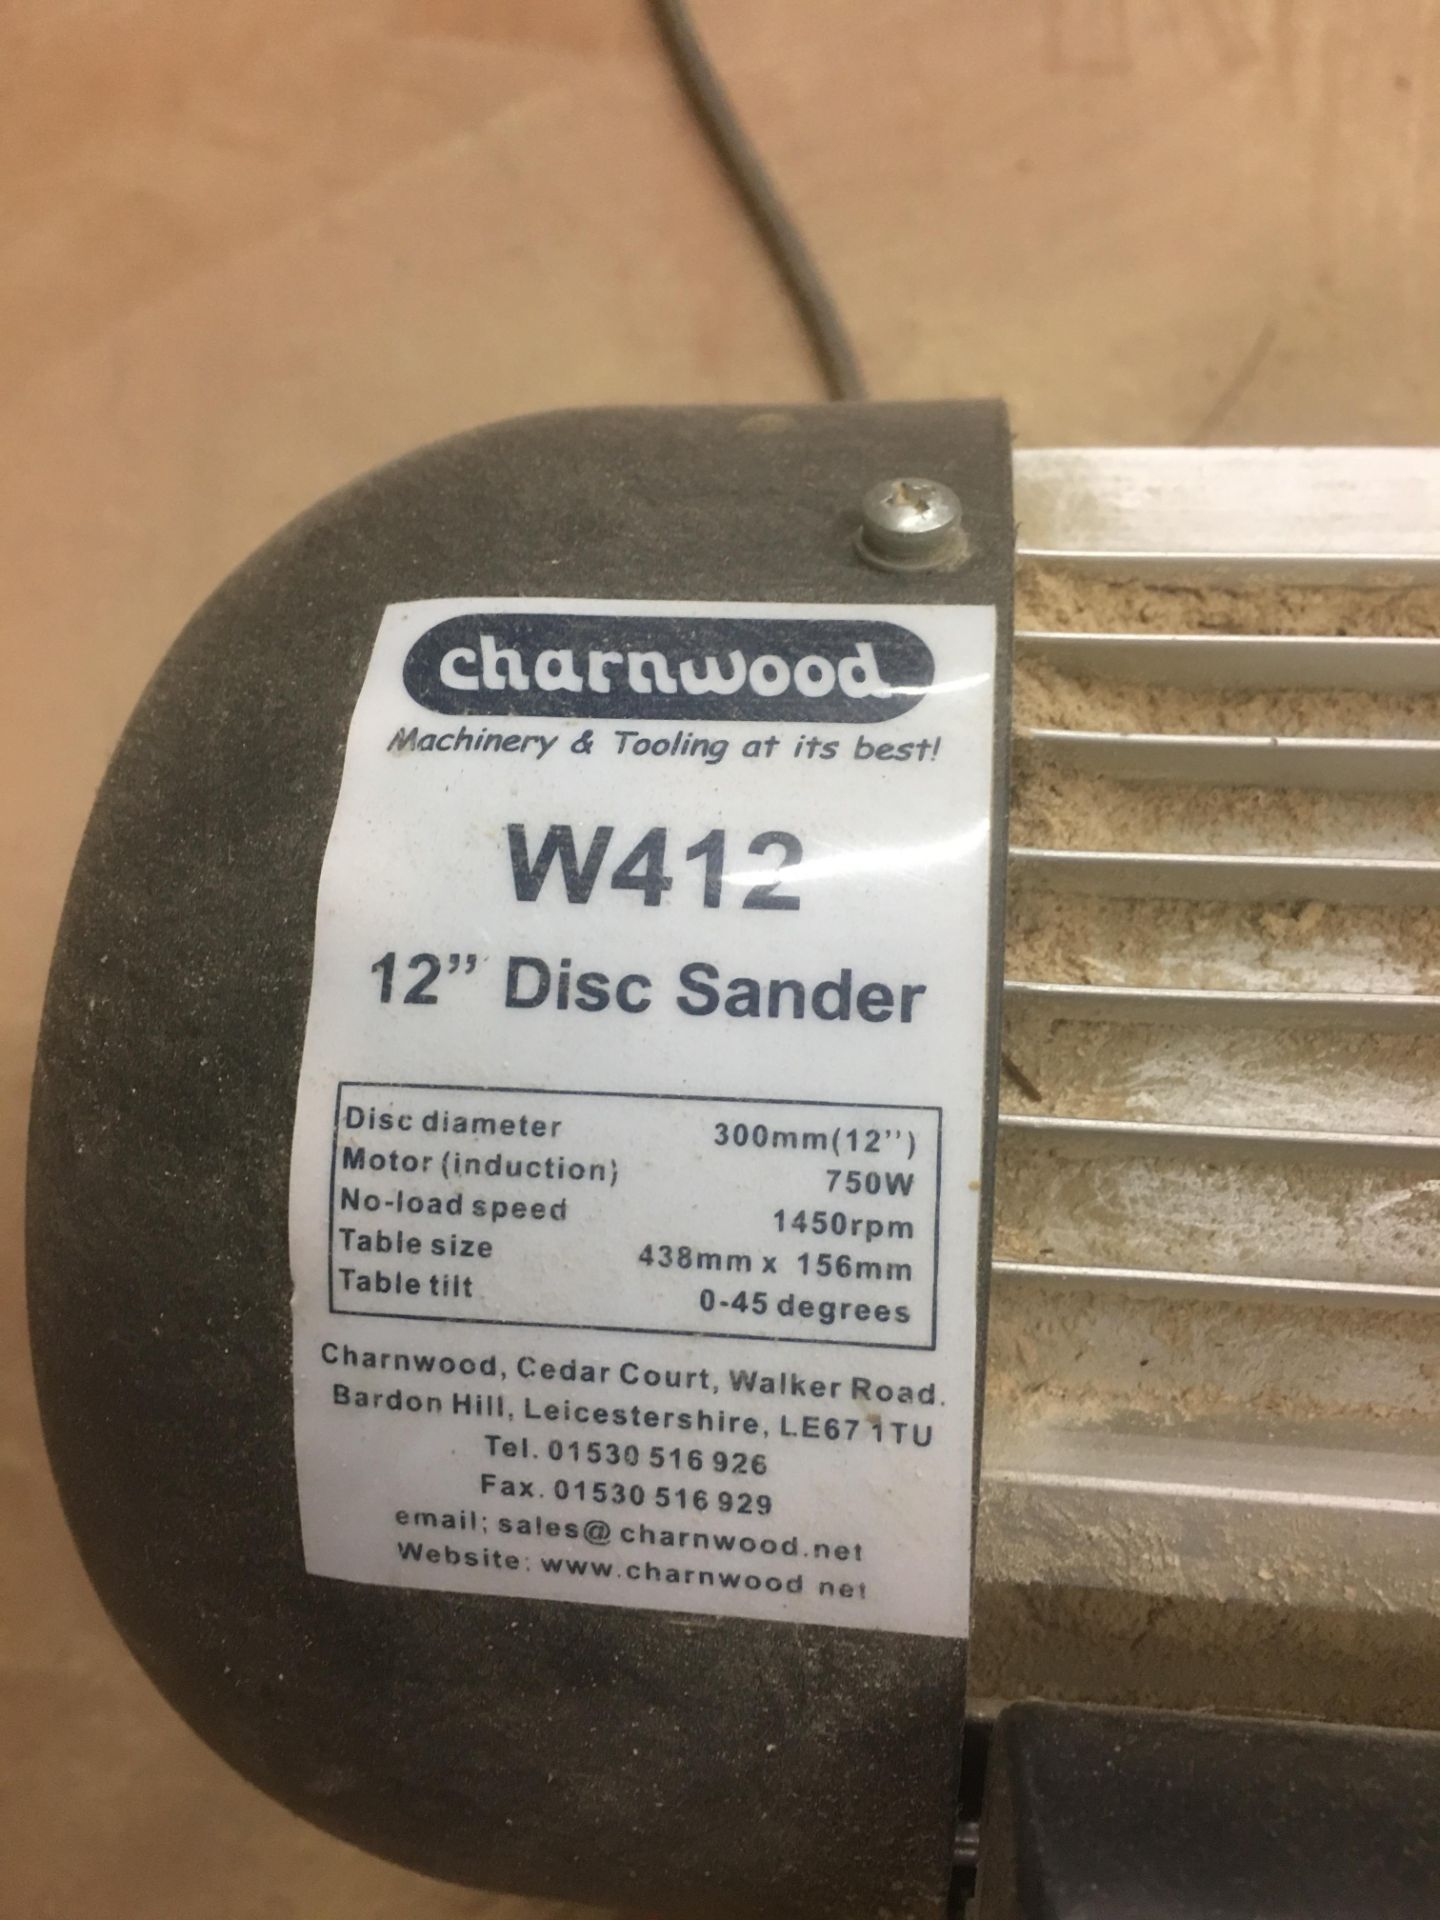 Charnwood W412 12in/ 300mm Disc Sander - Image 2 of 2